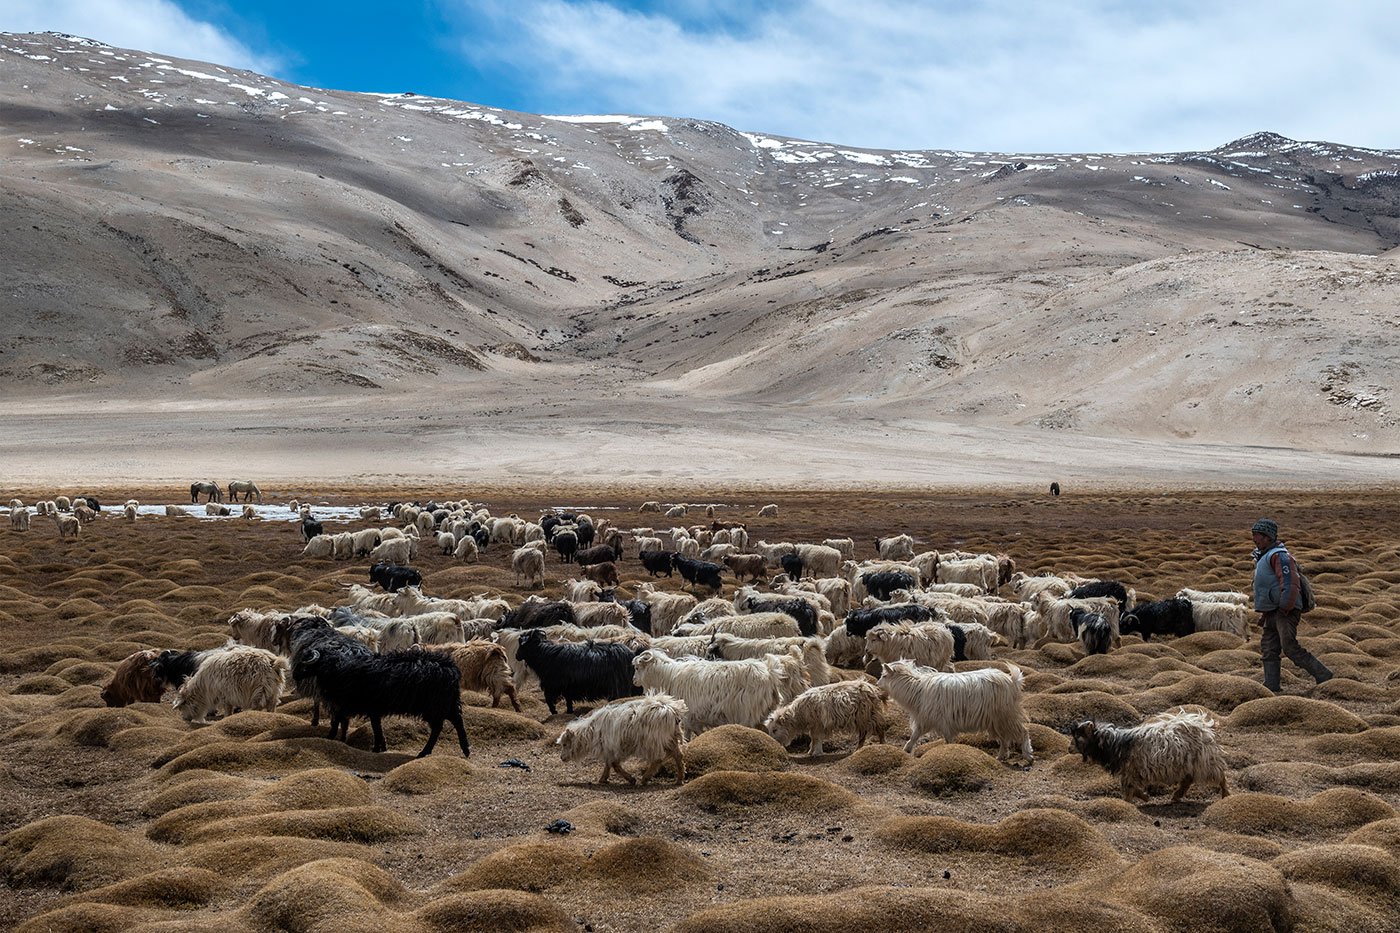 Around 110 kilometres northwest of Hanle, and about 60 kilometres northeast of Karzok village (also called Korzok) at the shore of the Tso Moriri lake, Tsering Nurgu and his herd of goats look for a  patch for grazing after trekking for 3-4 hours